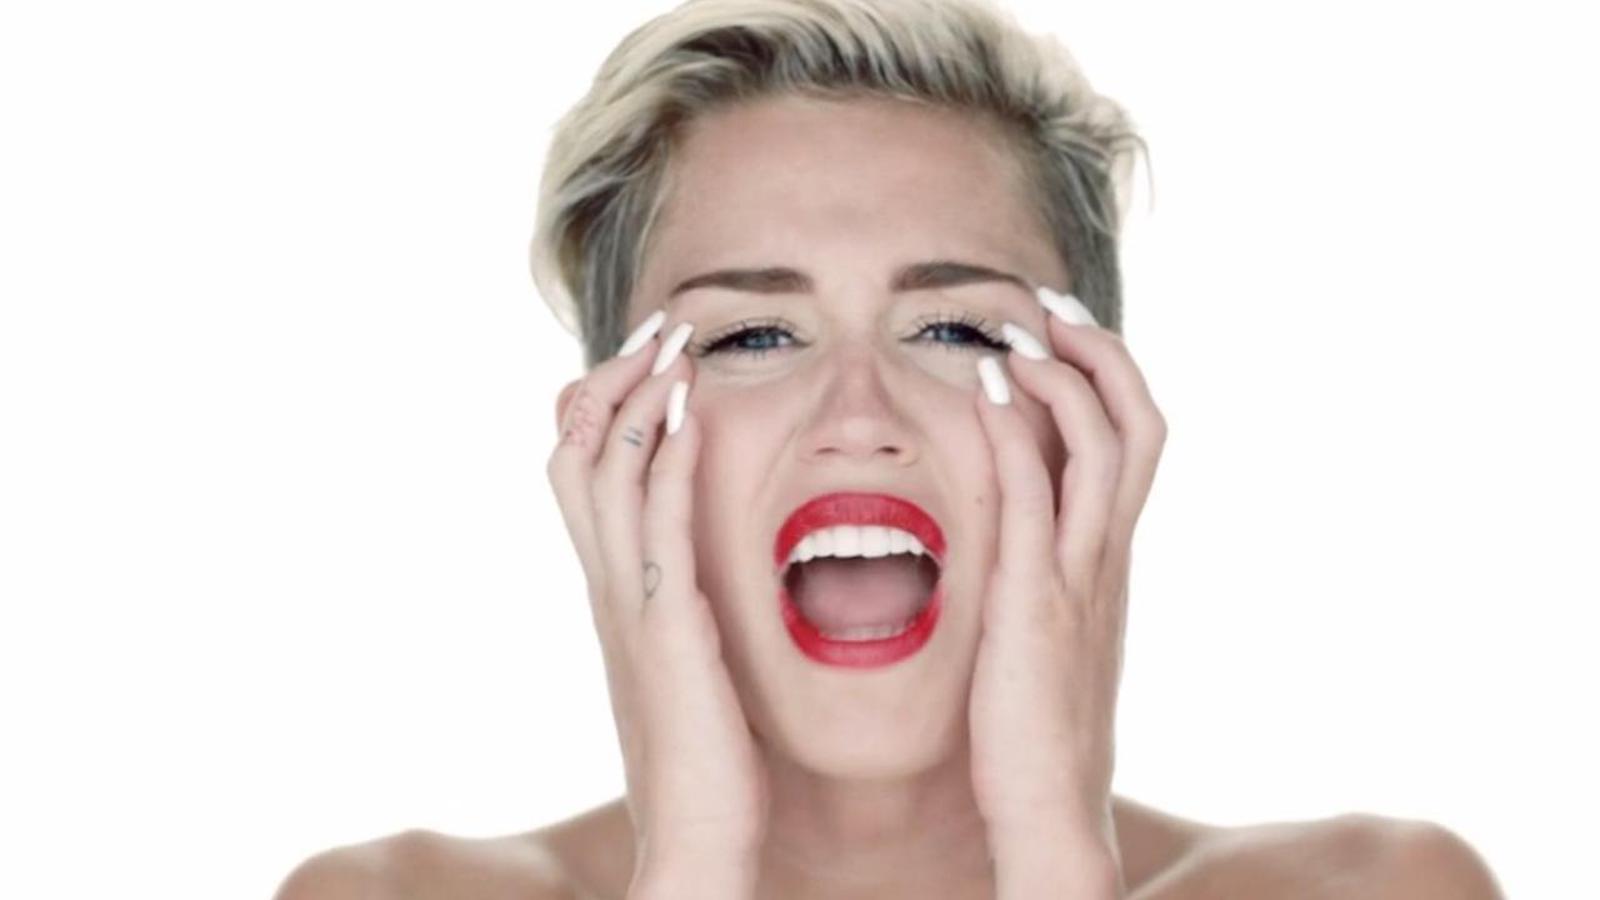 Miley Cyrus Talks Naked Wrecking Ball Video: Never 